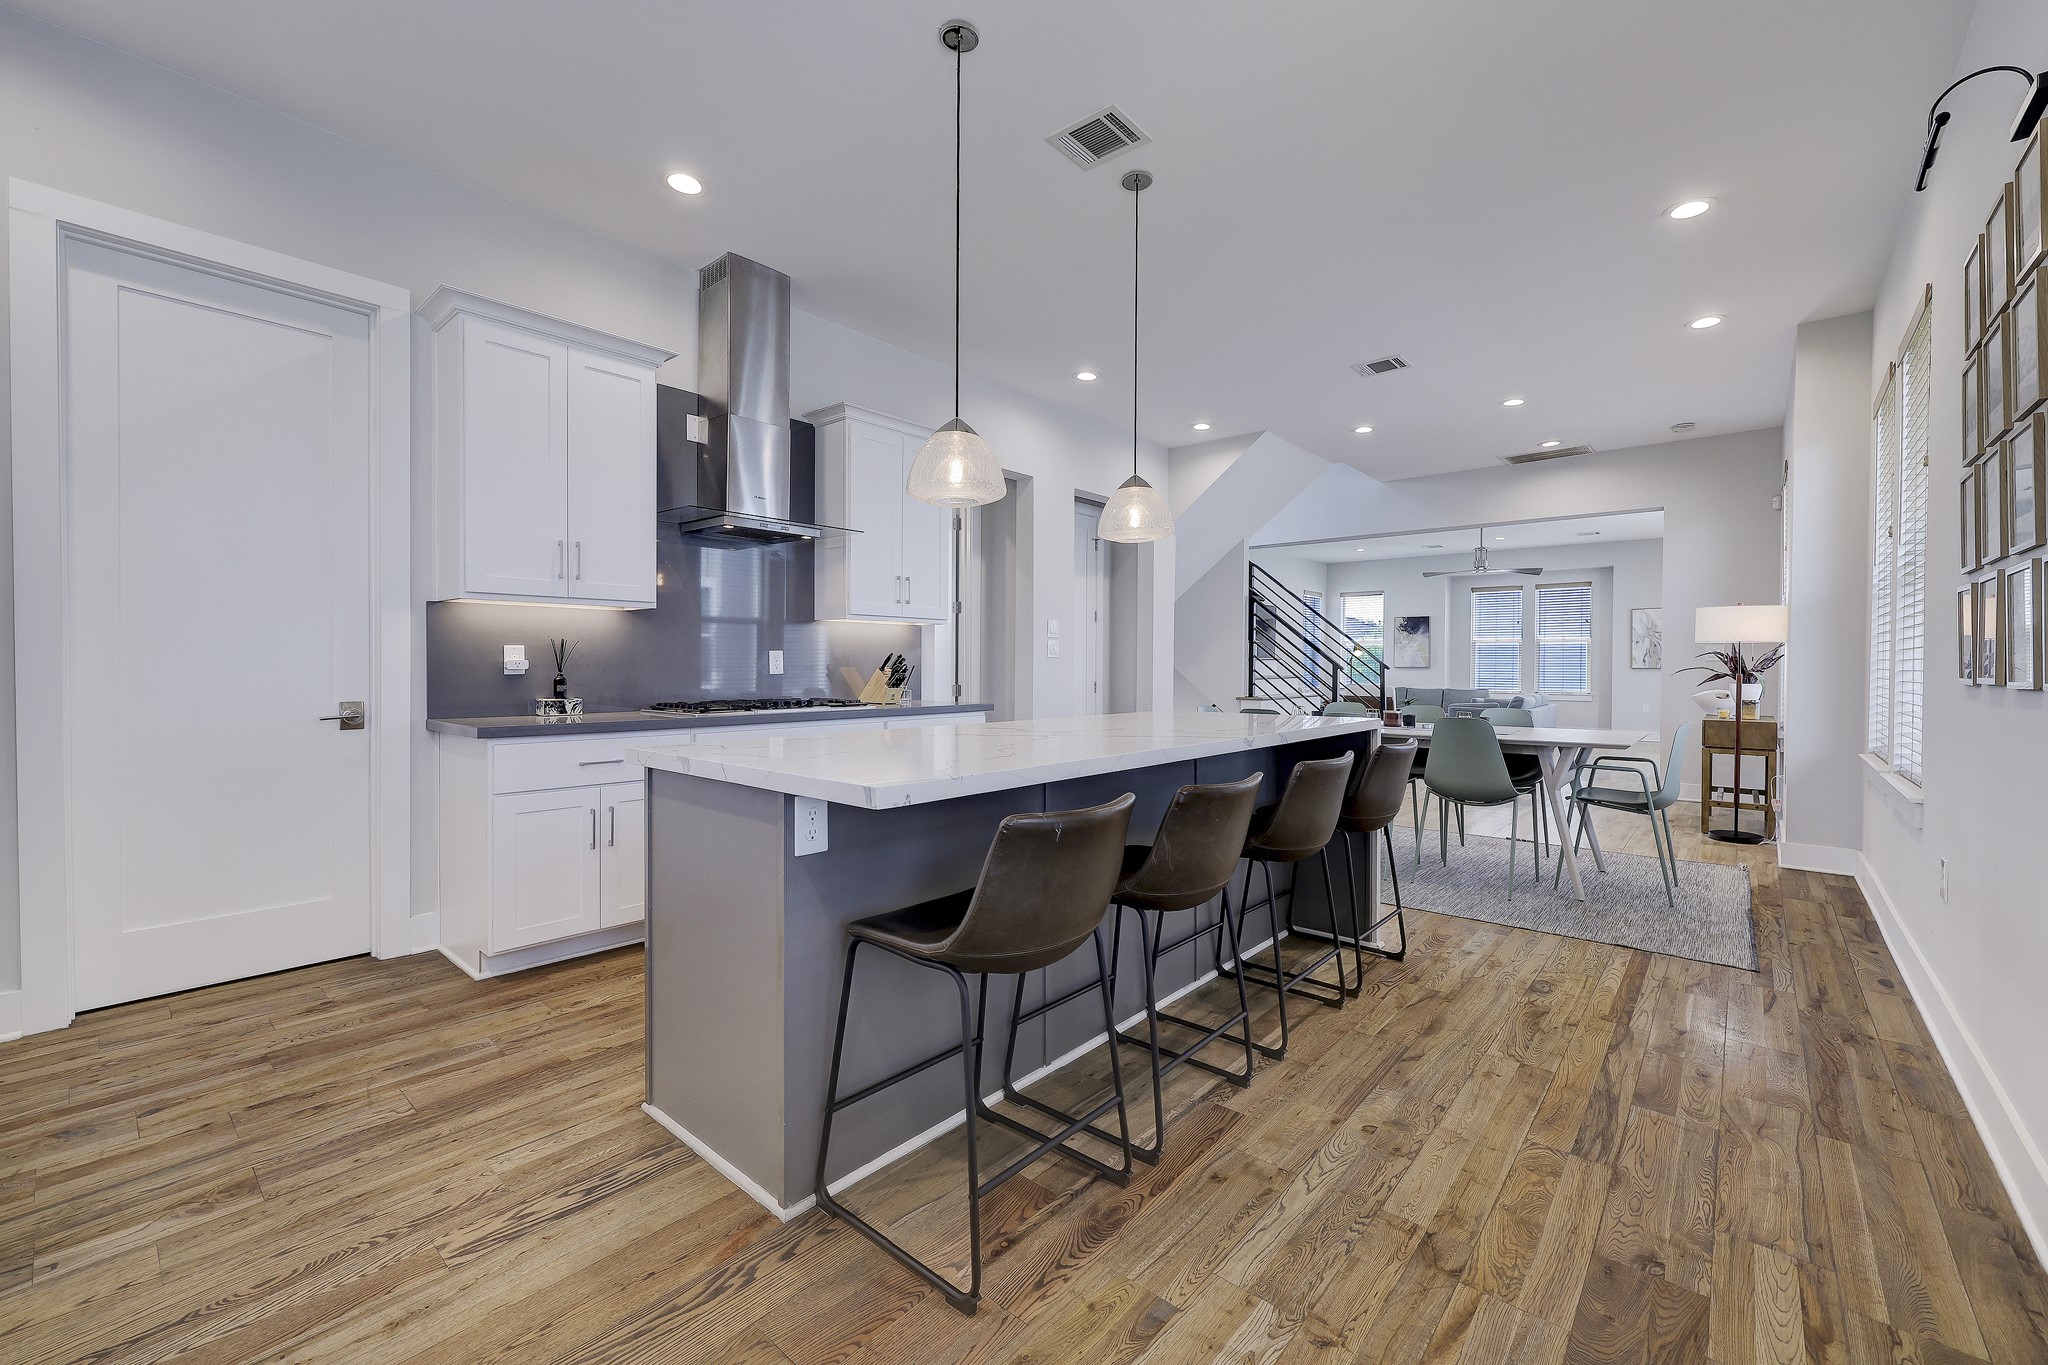 The spacious kitchen island, featuring a stunning waterfall edge design, not only provides ample counter space for meal preparation but also adds a touch of modern sophistication to the entire kitchen space.